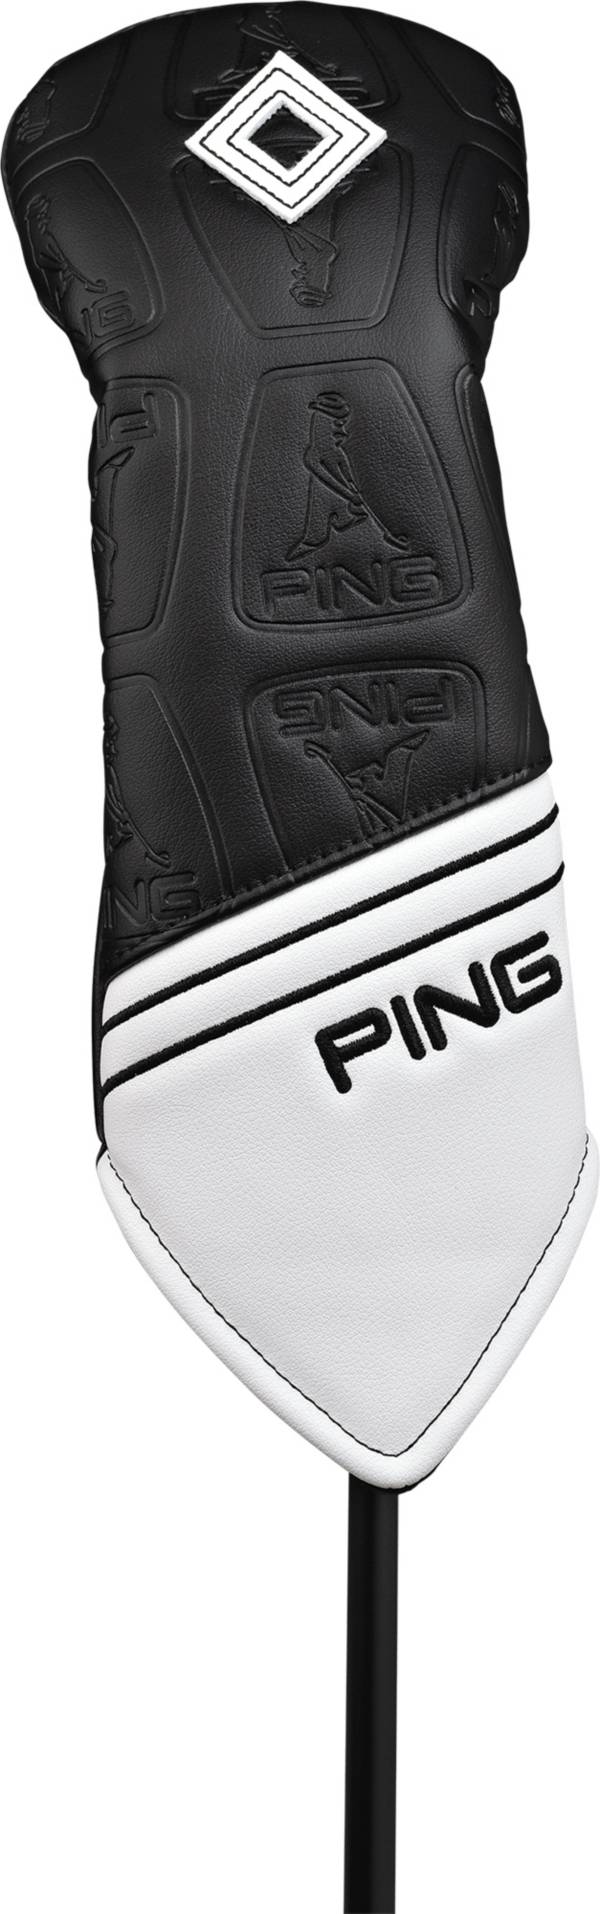 PING Core Fairway Wood Headcover product image